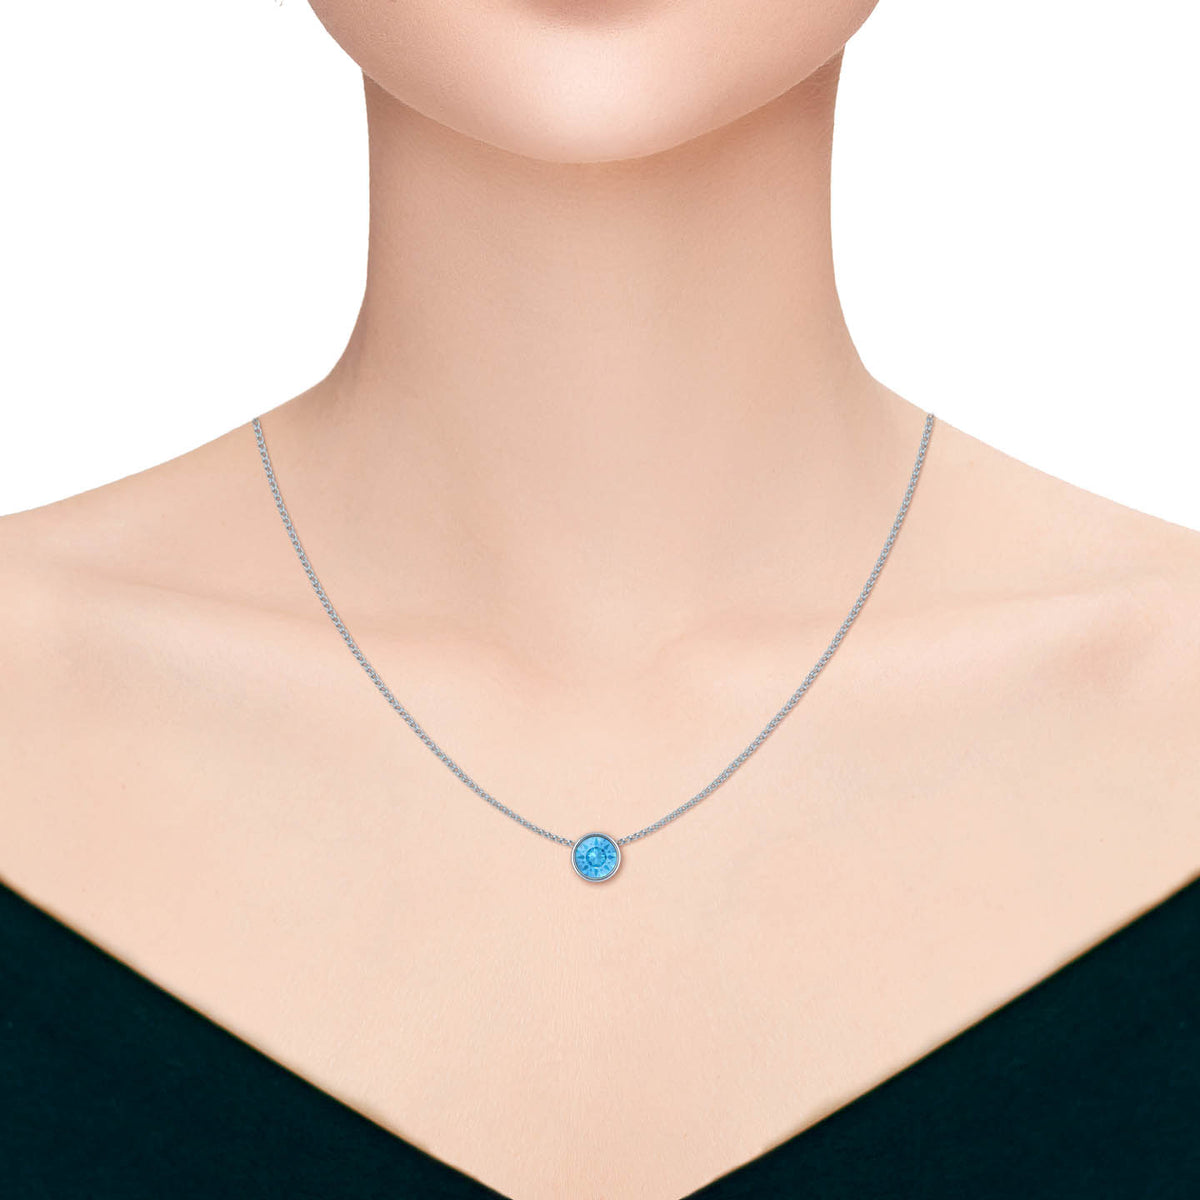 Harley Small Pendant Necklace with Blue Aquamarine Round Crystals from Swarovski Silver Toned Rhodium Plated - Ed Heart